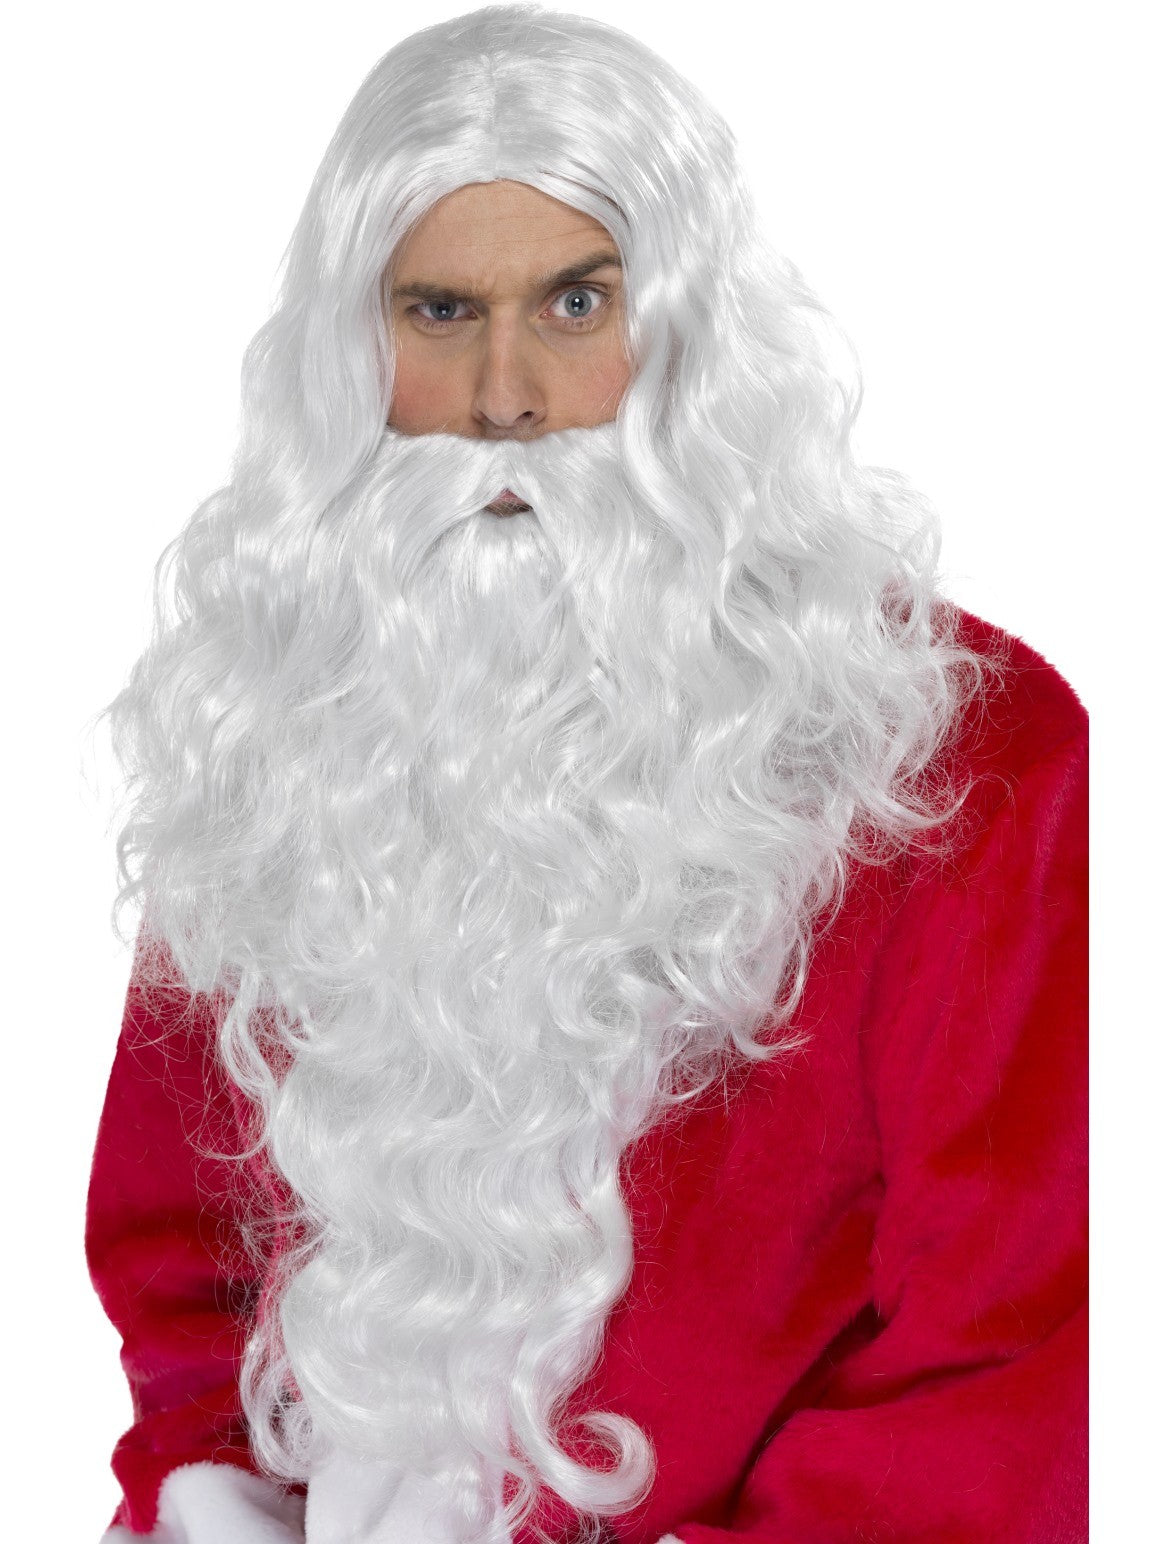 Santa Wig and Beard set Men's Christmas costume accessory Deluxe